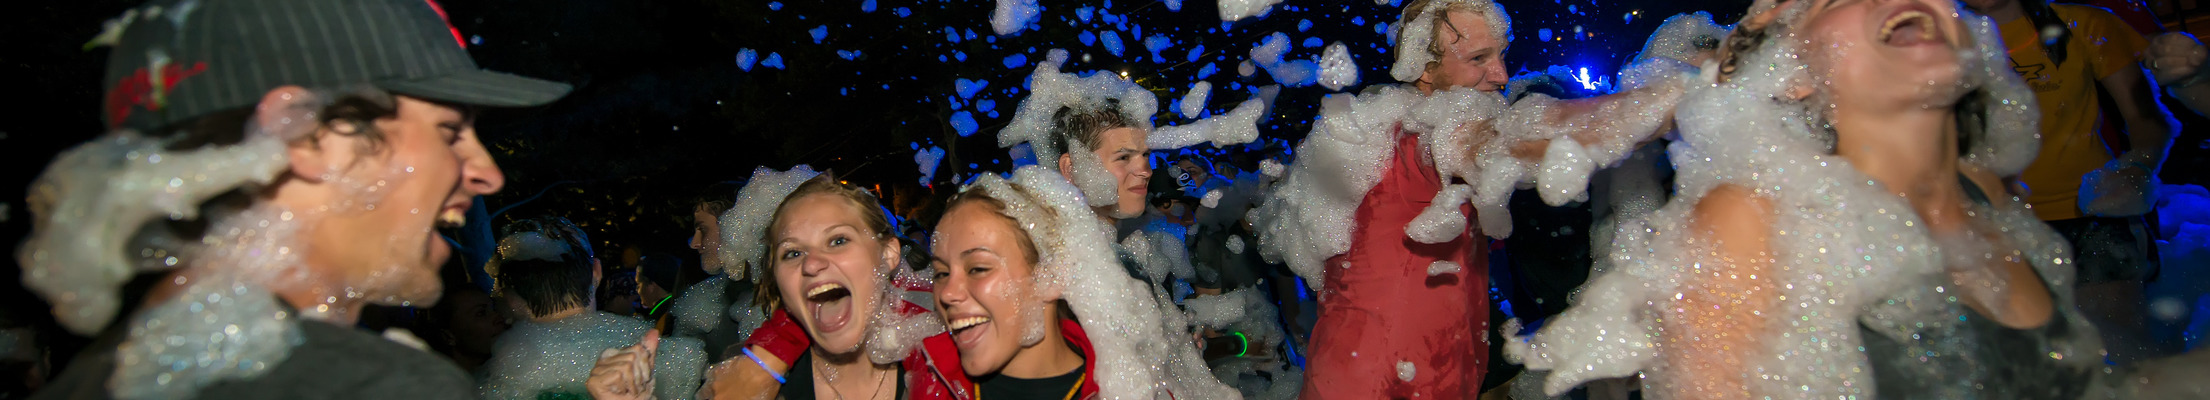 Students engaged in activities like a bubble party event in the residence halls